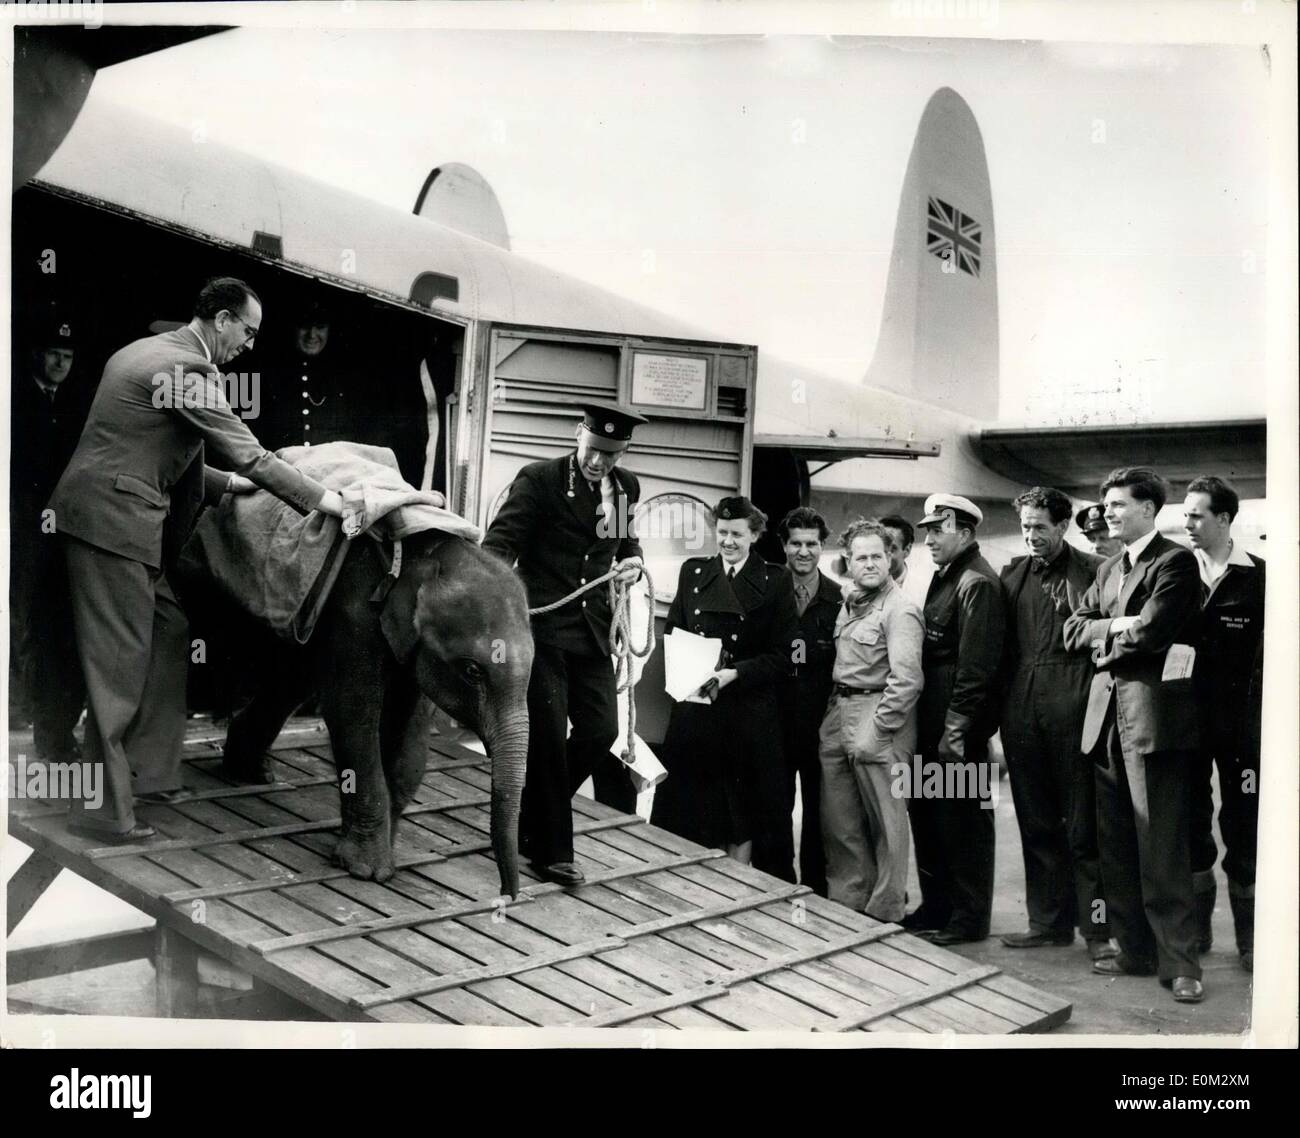 Apr. 11, 1953 - BABY ELEPHANT FOR LONDON ZOO ARRIVES: A baby elephant, destined for the Zoological Gardens, Regent's Park, arrived at London Airport today from Assam. Her name is Lakhsmi (after the Hindu goddess of wealth), and she is about 11 months old. Lakhsmi was caught in February in Assam, and is 4ft. lin. high. Keystone Photo Shows:- Lakhsmi, the baby elephant, being led from the aircraft on arrival at London Airport today. Stock Photo